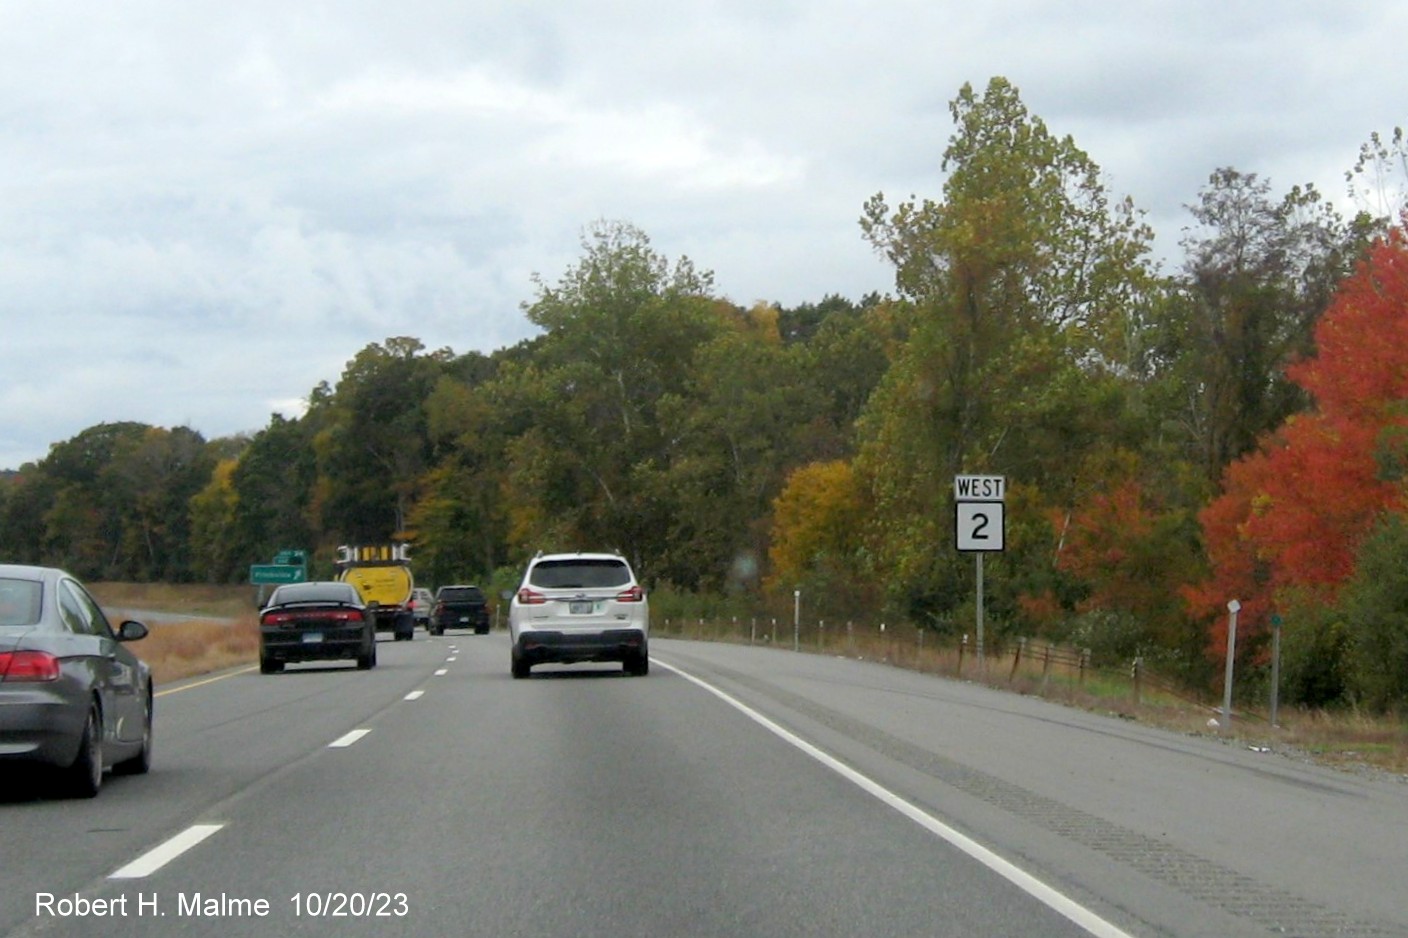 Image of new West CT 2 reassurance marker with all caps West direction banner in Norwich, October 2023